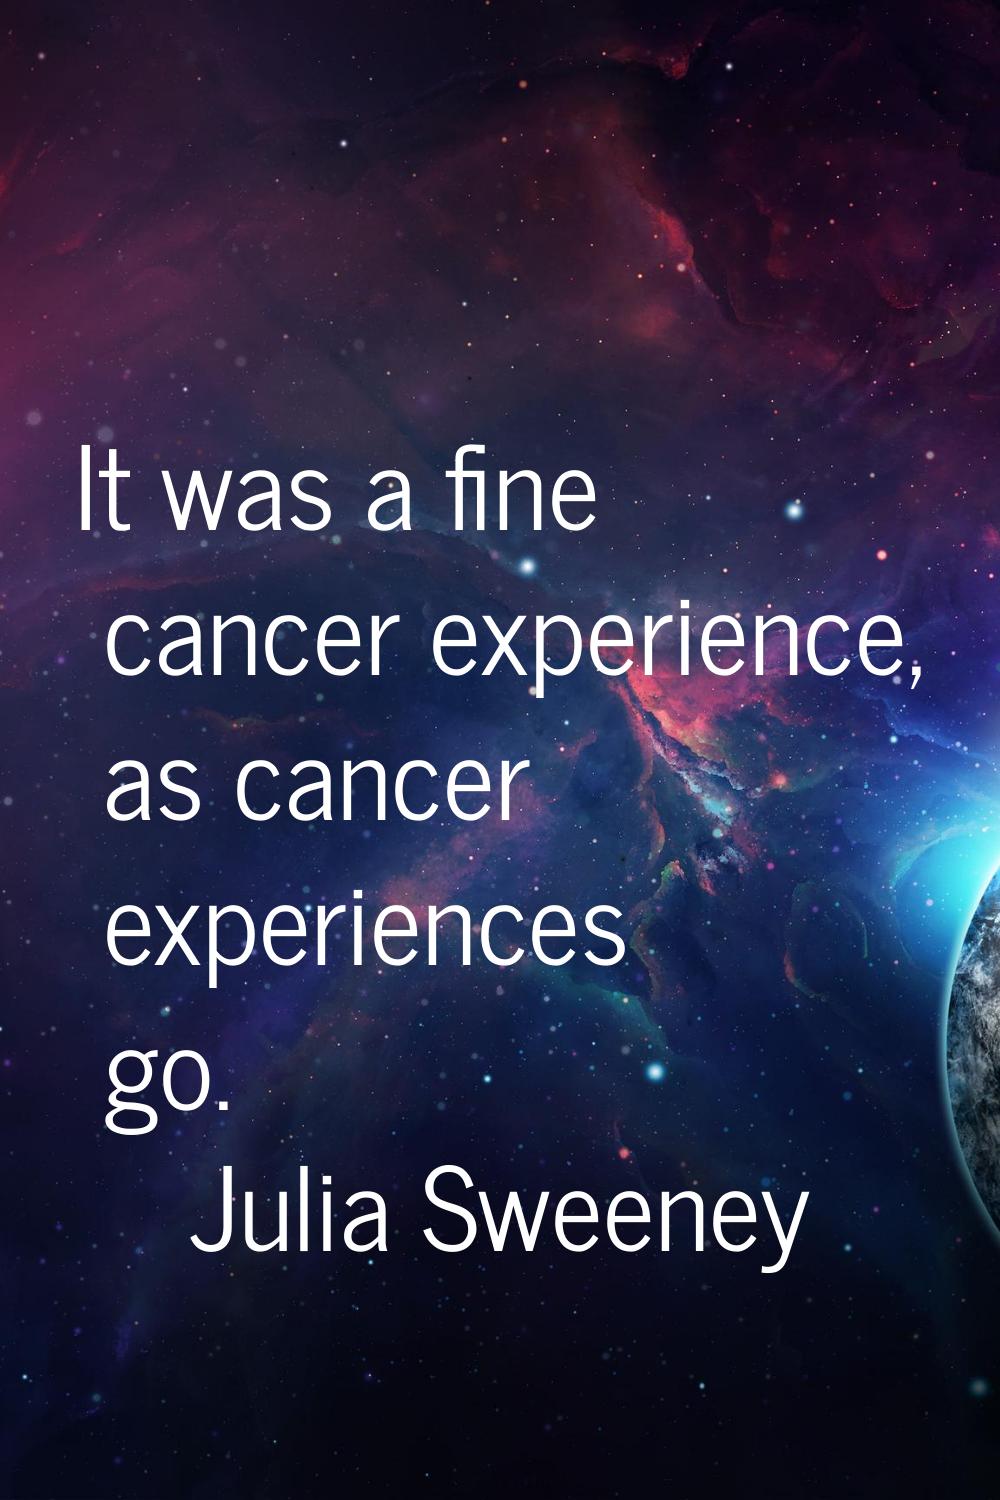 It was a fine cancer experience, as cancer experiences go.